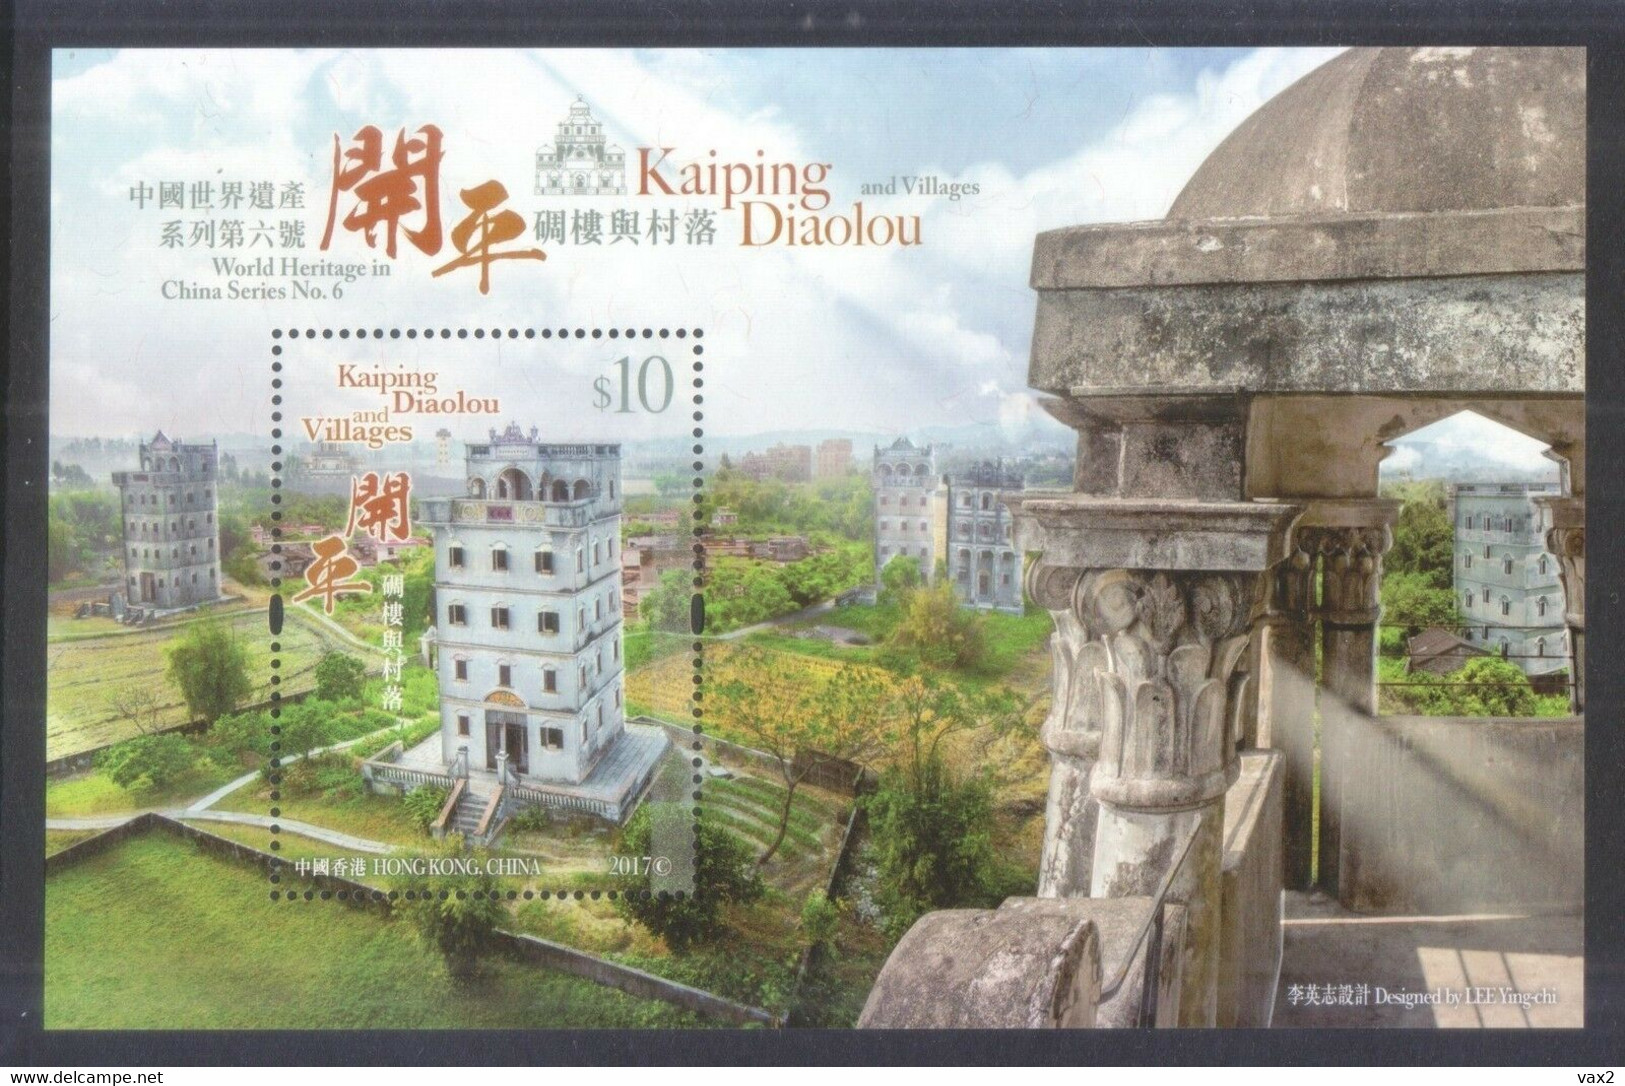 Hong Kong 2017 S#1835 World Heritage In China Series No. 6: Kaiping Diaolou & Villages M/S MNH UNESCO Unusual (embossed) - Neufs